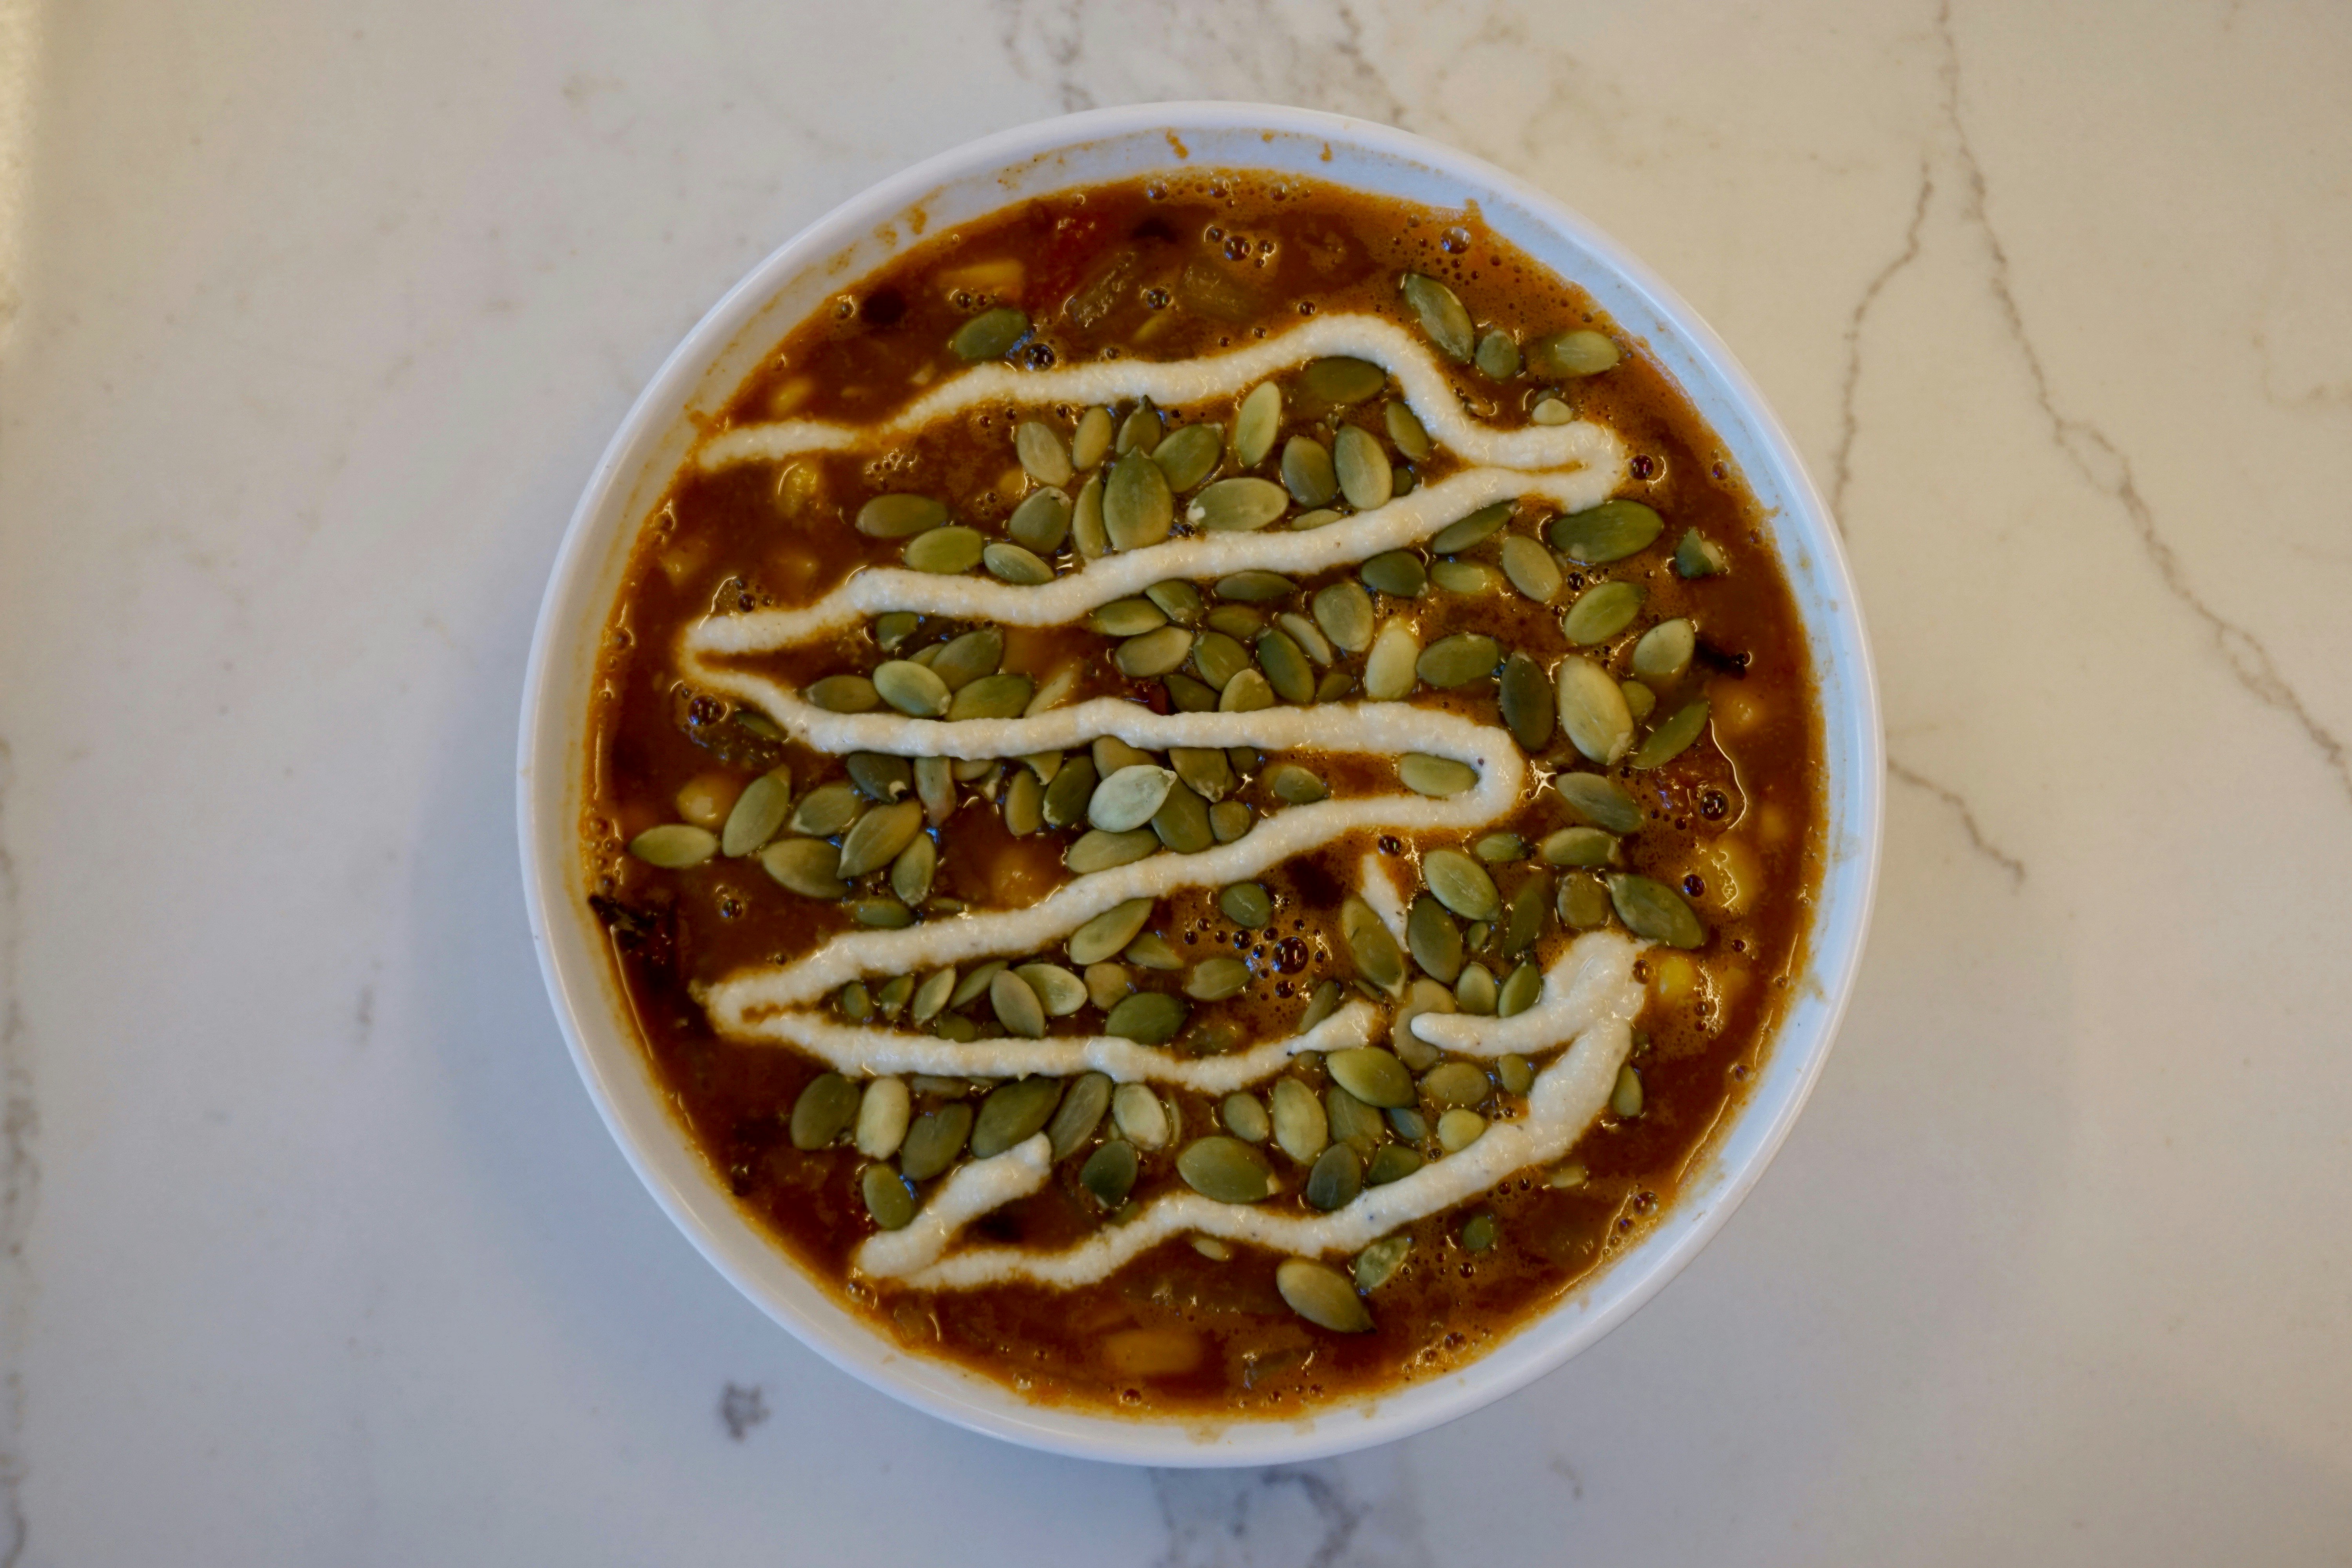 A white bowl sits on white marble counter; it's filled with a rich, reddish-brown, plant-based chili, which is topped with pumpkin seeds and a zig-zag of a creamy sauce.